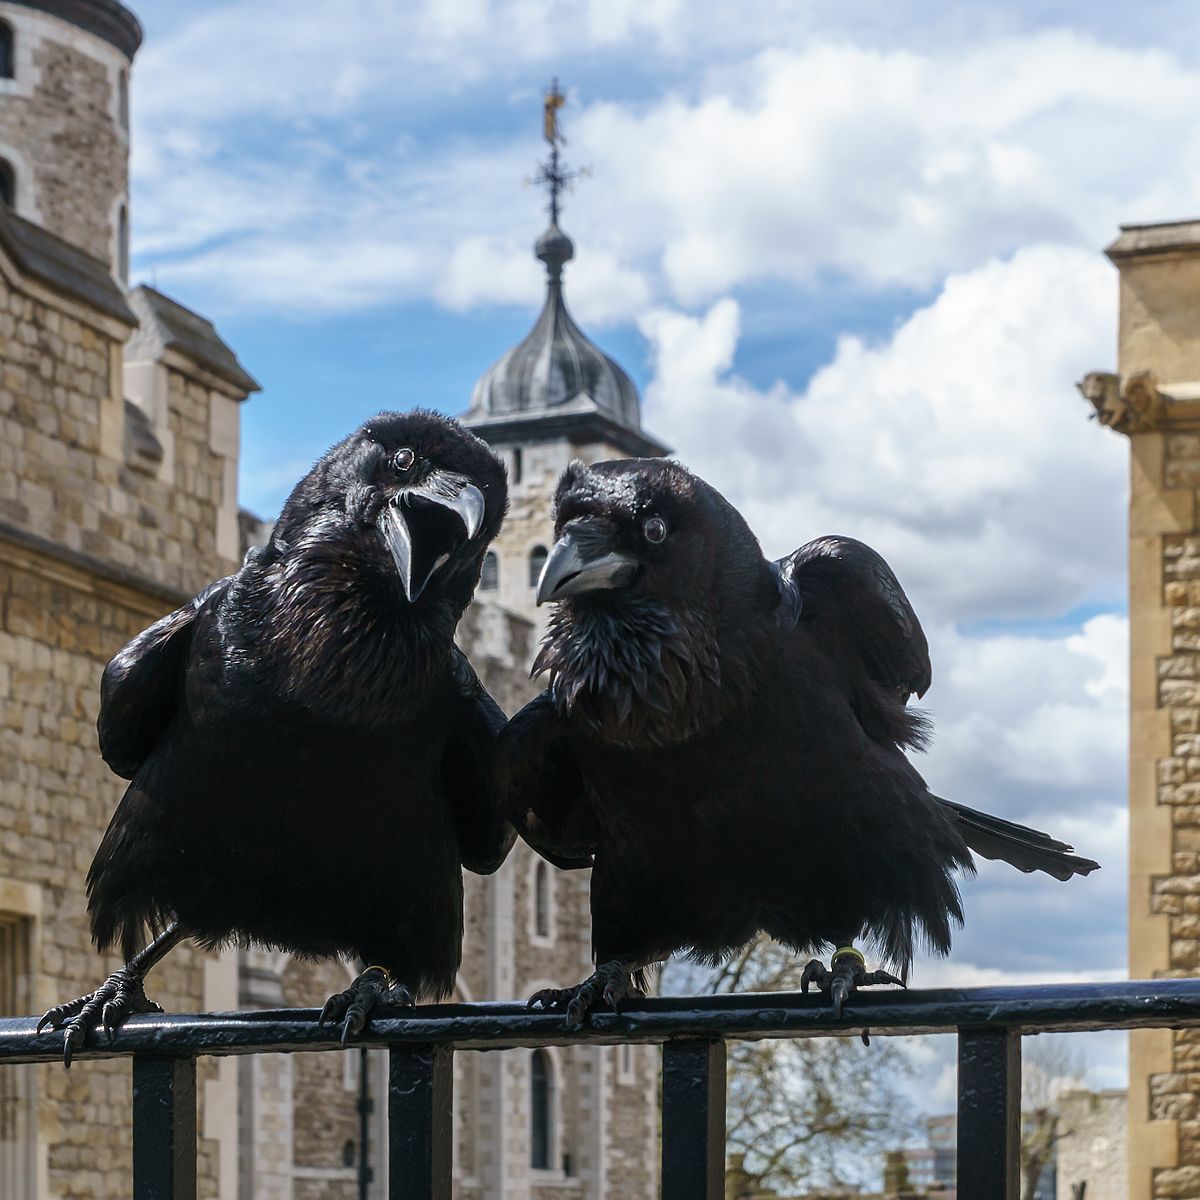 Because of an old superstition, several ravens are kept at the Tower of London at all times. These ravens are enlisted soldiers of the Kingdom, and have occasionally been dismissed for bad conduct. While wild ravens live for 10-15 years, Tower ravens can live past 40 years.

“Their presence is traditionally believed to protect the Crown and the tower; a superstition holds that “if the Tower of London ravens are lost or fly away, the Crown will fall and Britain with it””